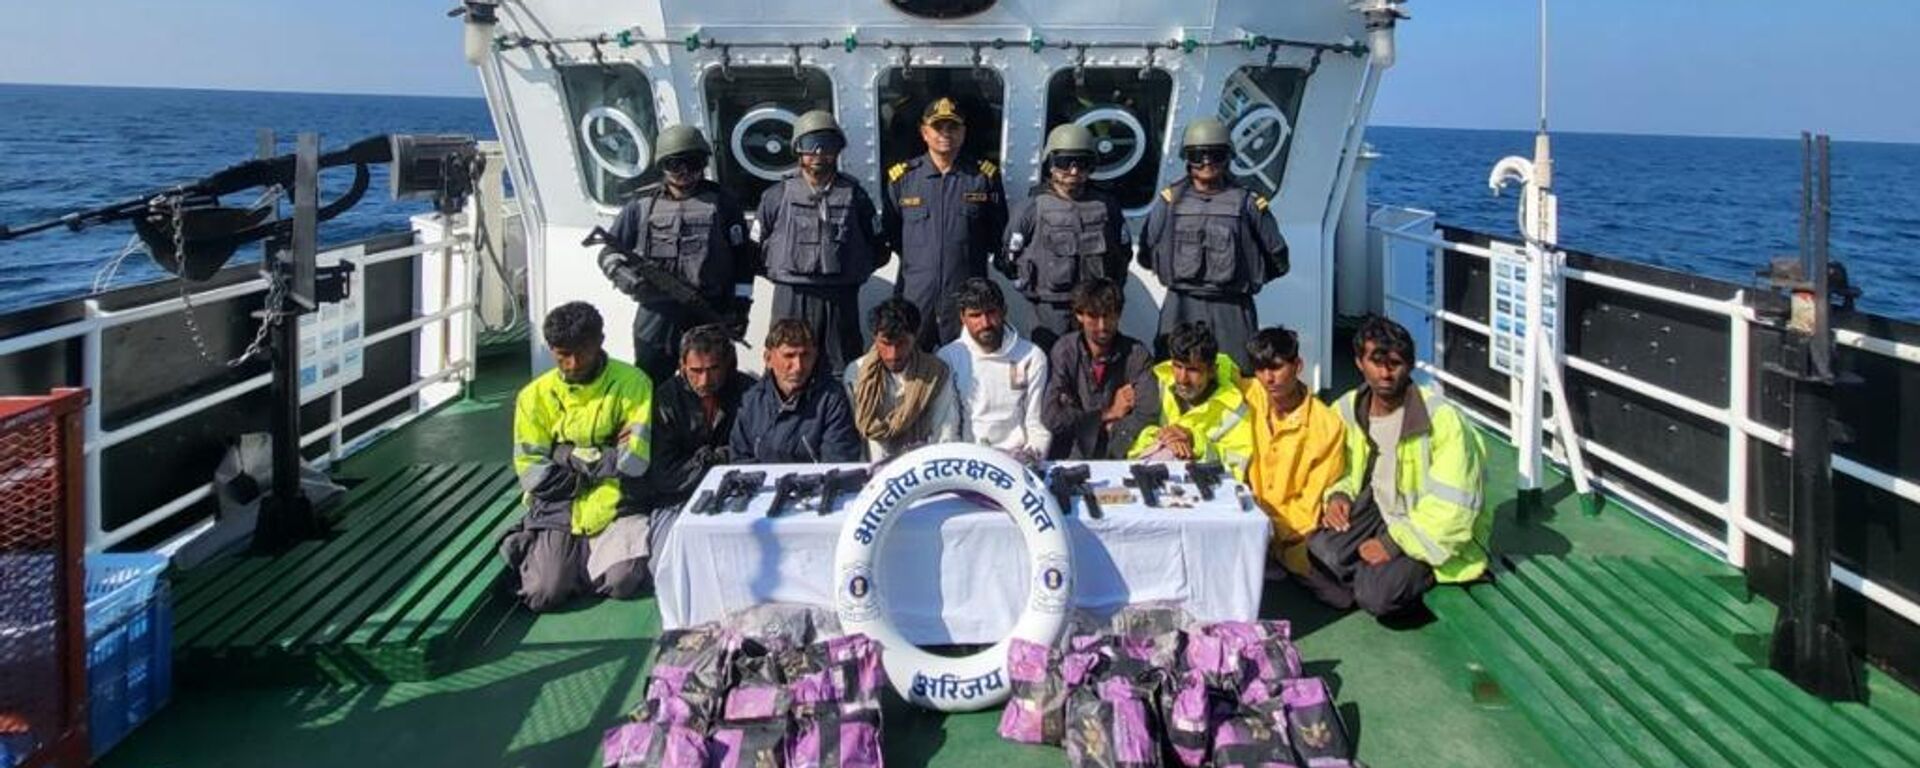 The Indian Coastguard apprehended a Pakistani boat with a crew of ten in Indian waters carrying arms, ammo allegedly worth Rs 300 crores ($36 million). - Sputnik India, 1920, 26.12.2022